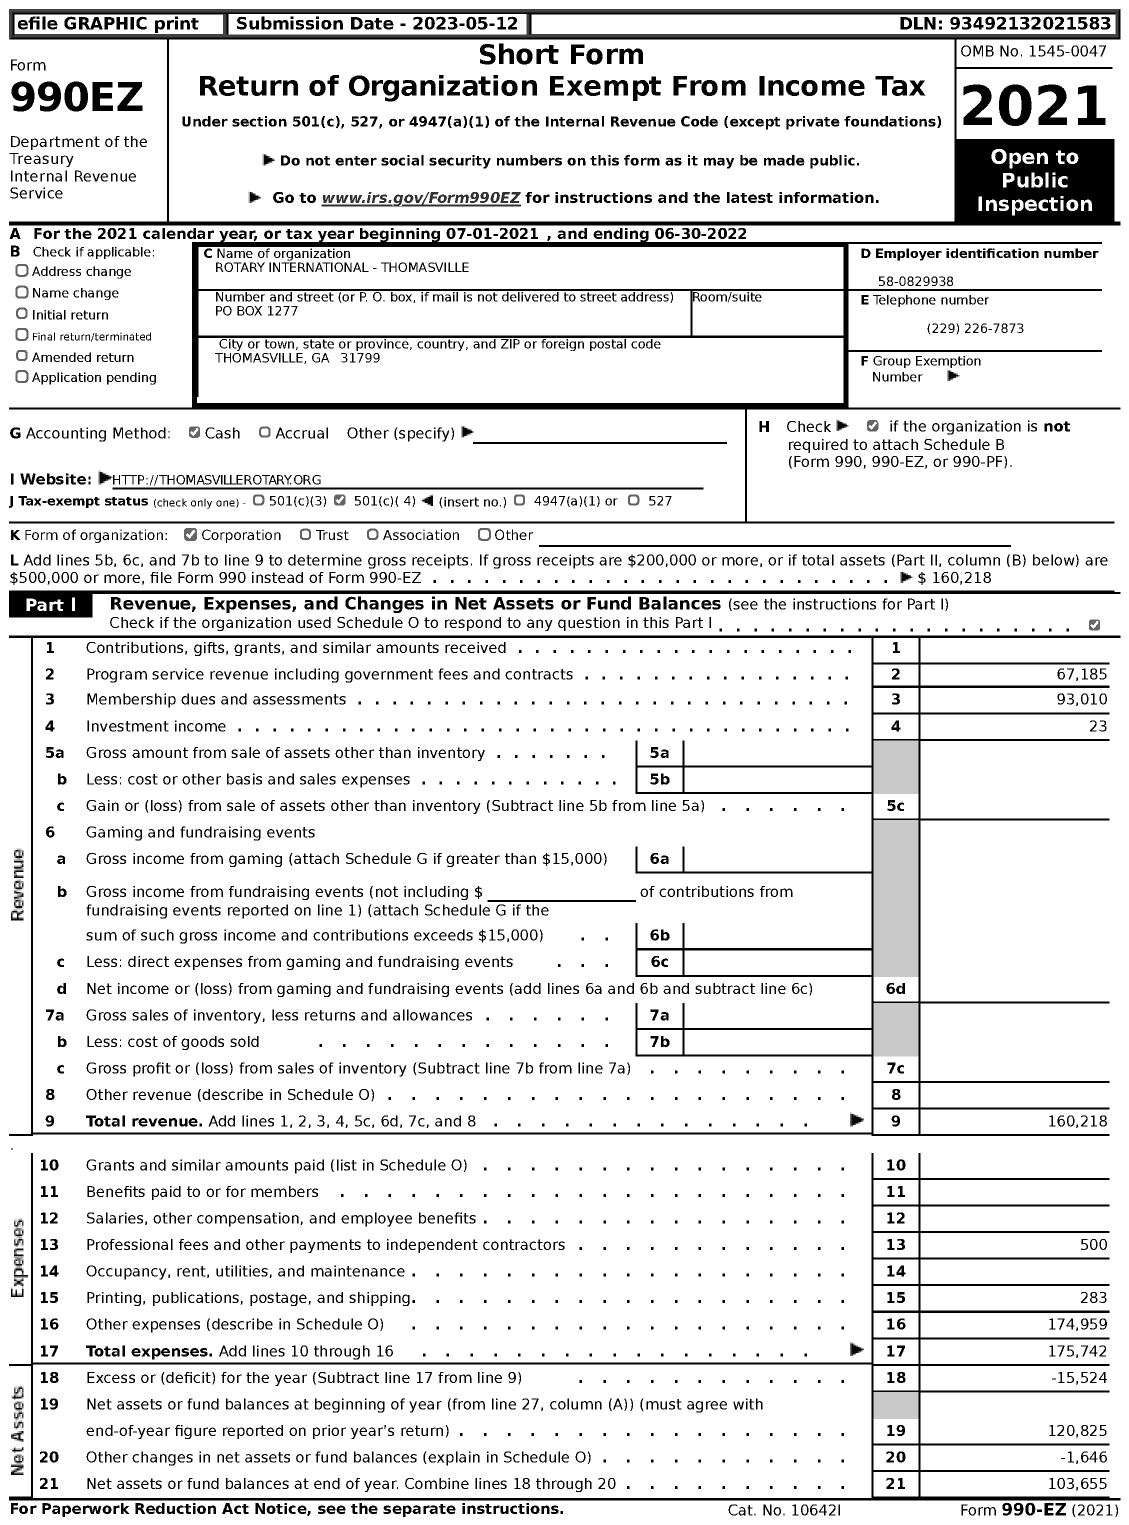 Image of first page of 2021 Form 990EZ for Rotary International - Thomasville